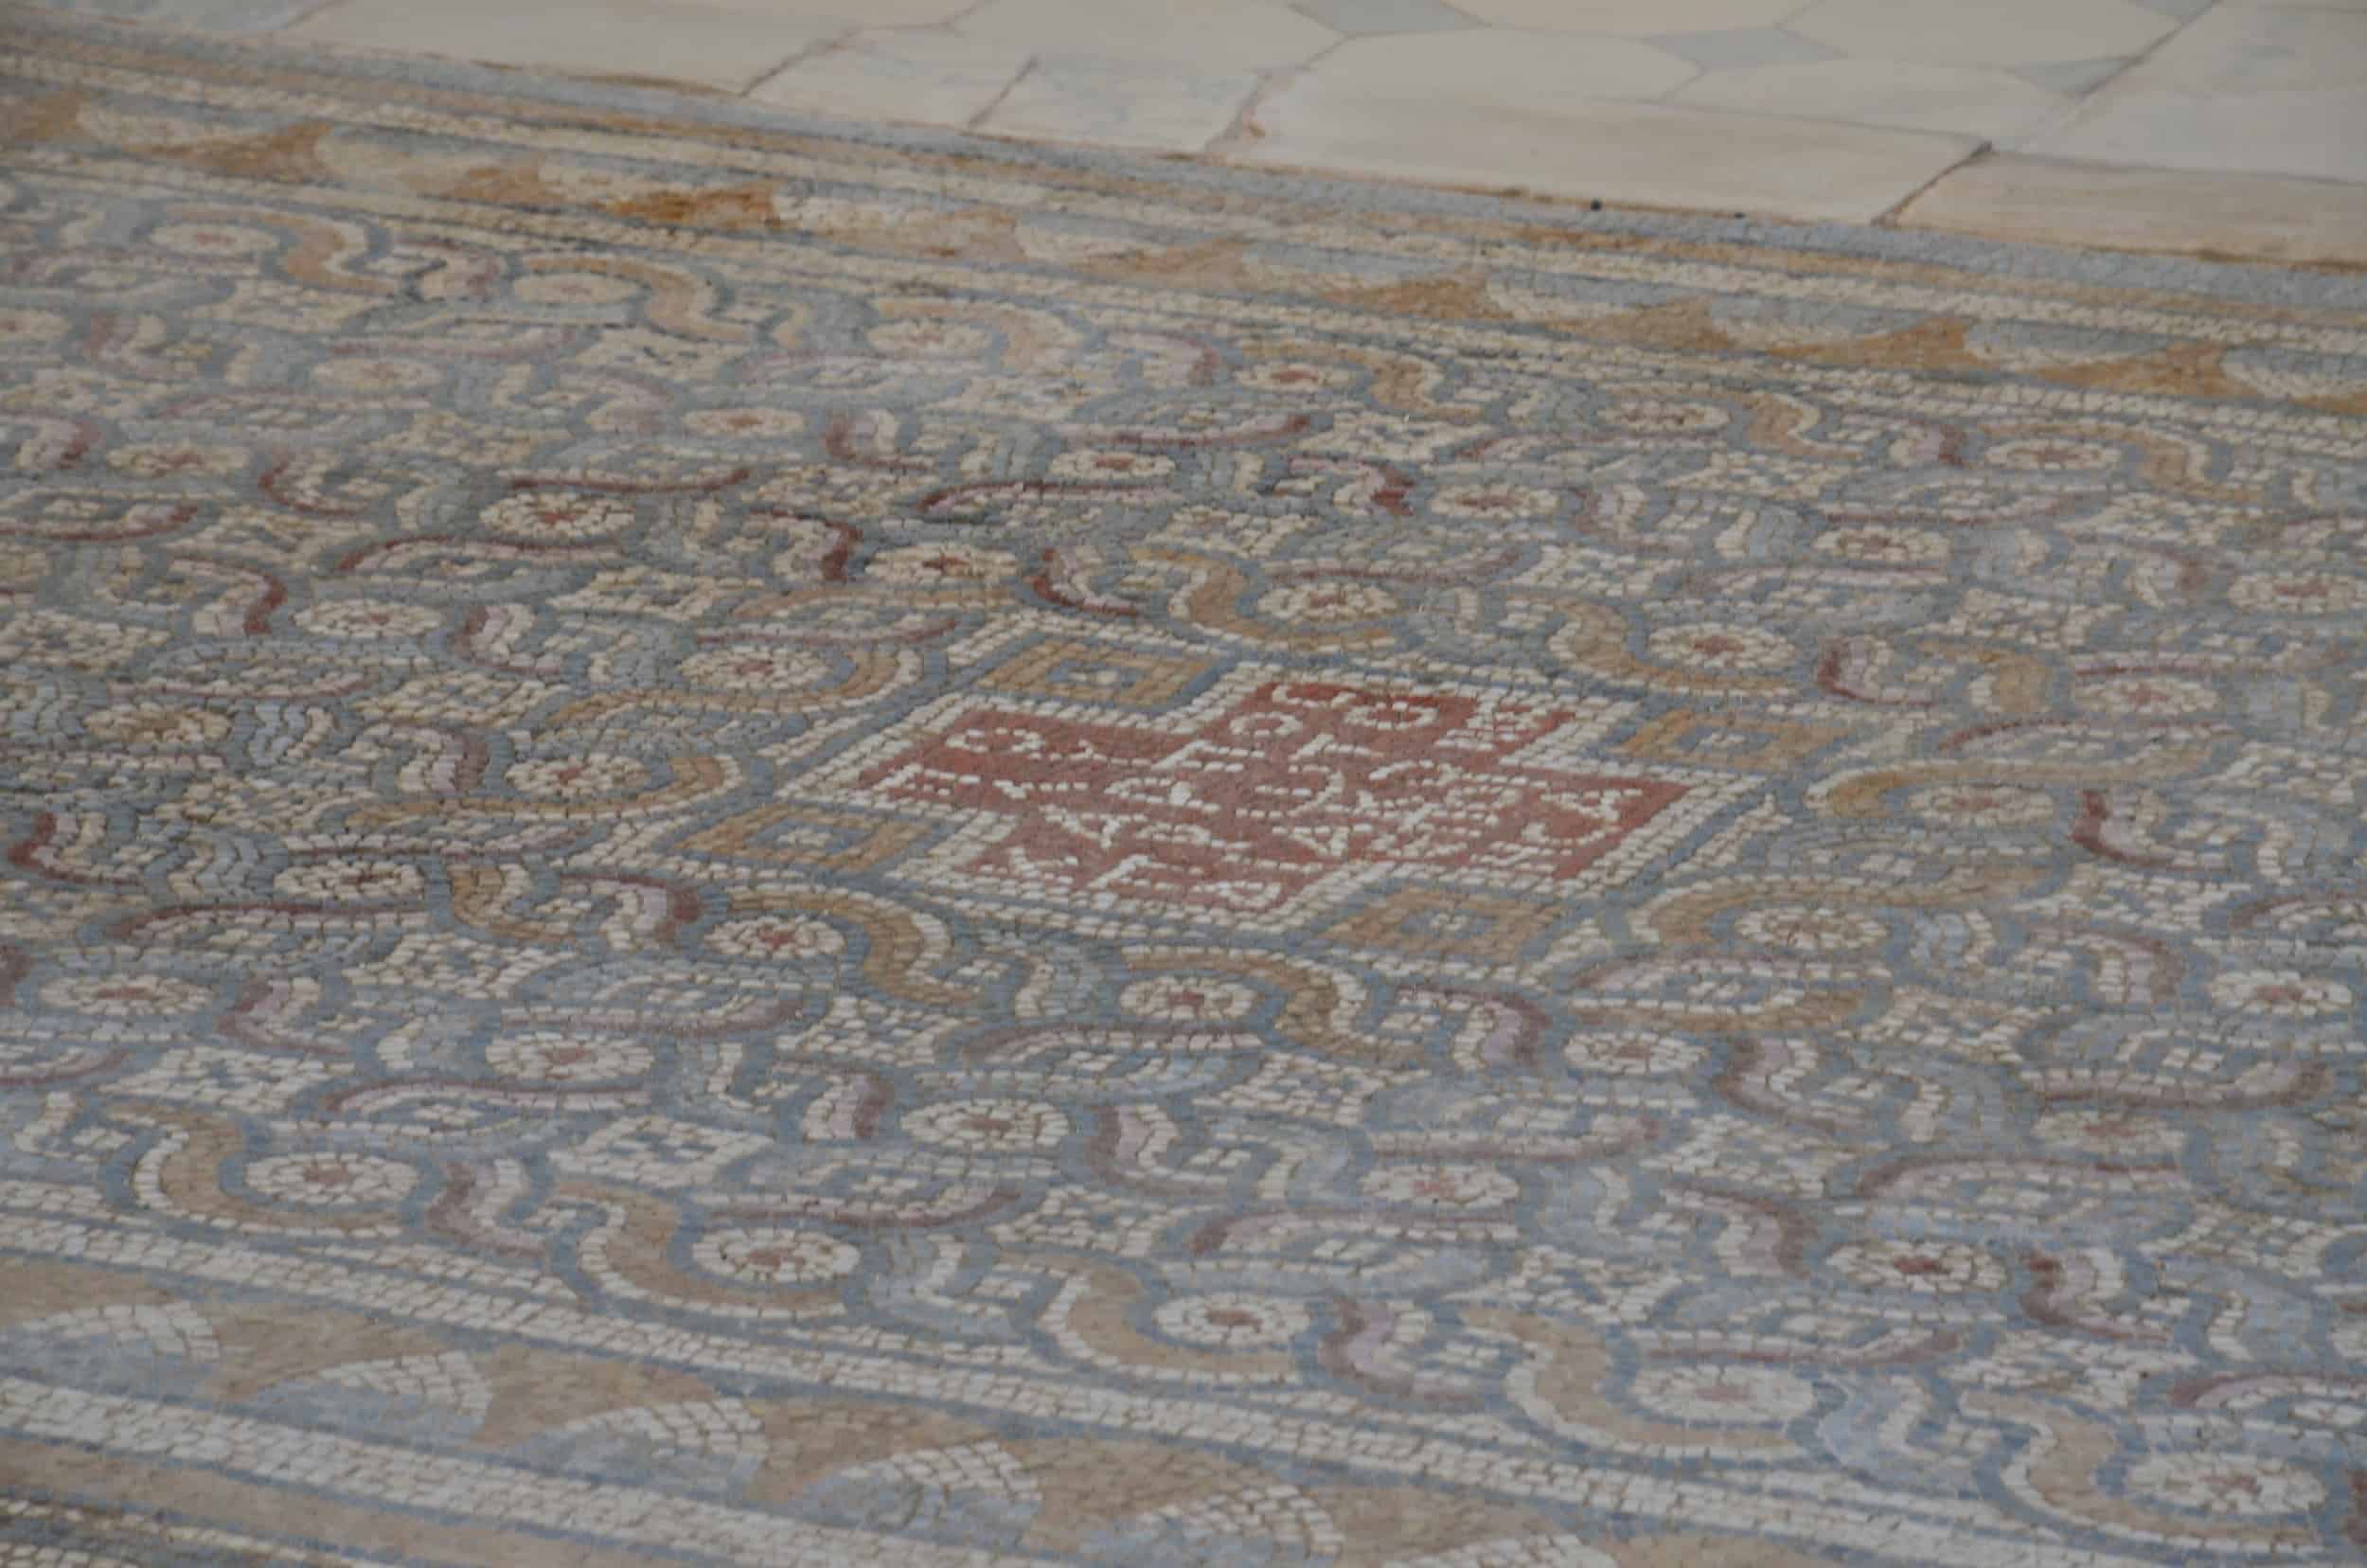 "Polycarpos protodeacon made it" in the south aisle at the Church of Laodicea